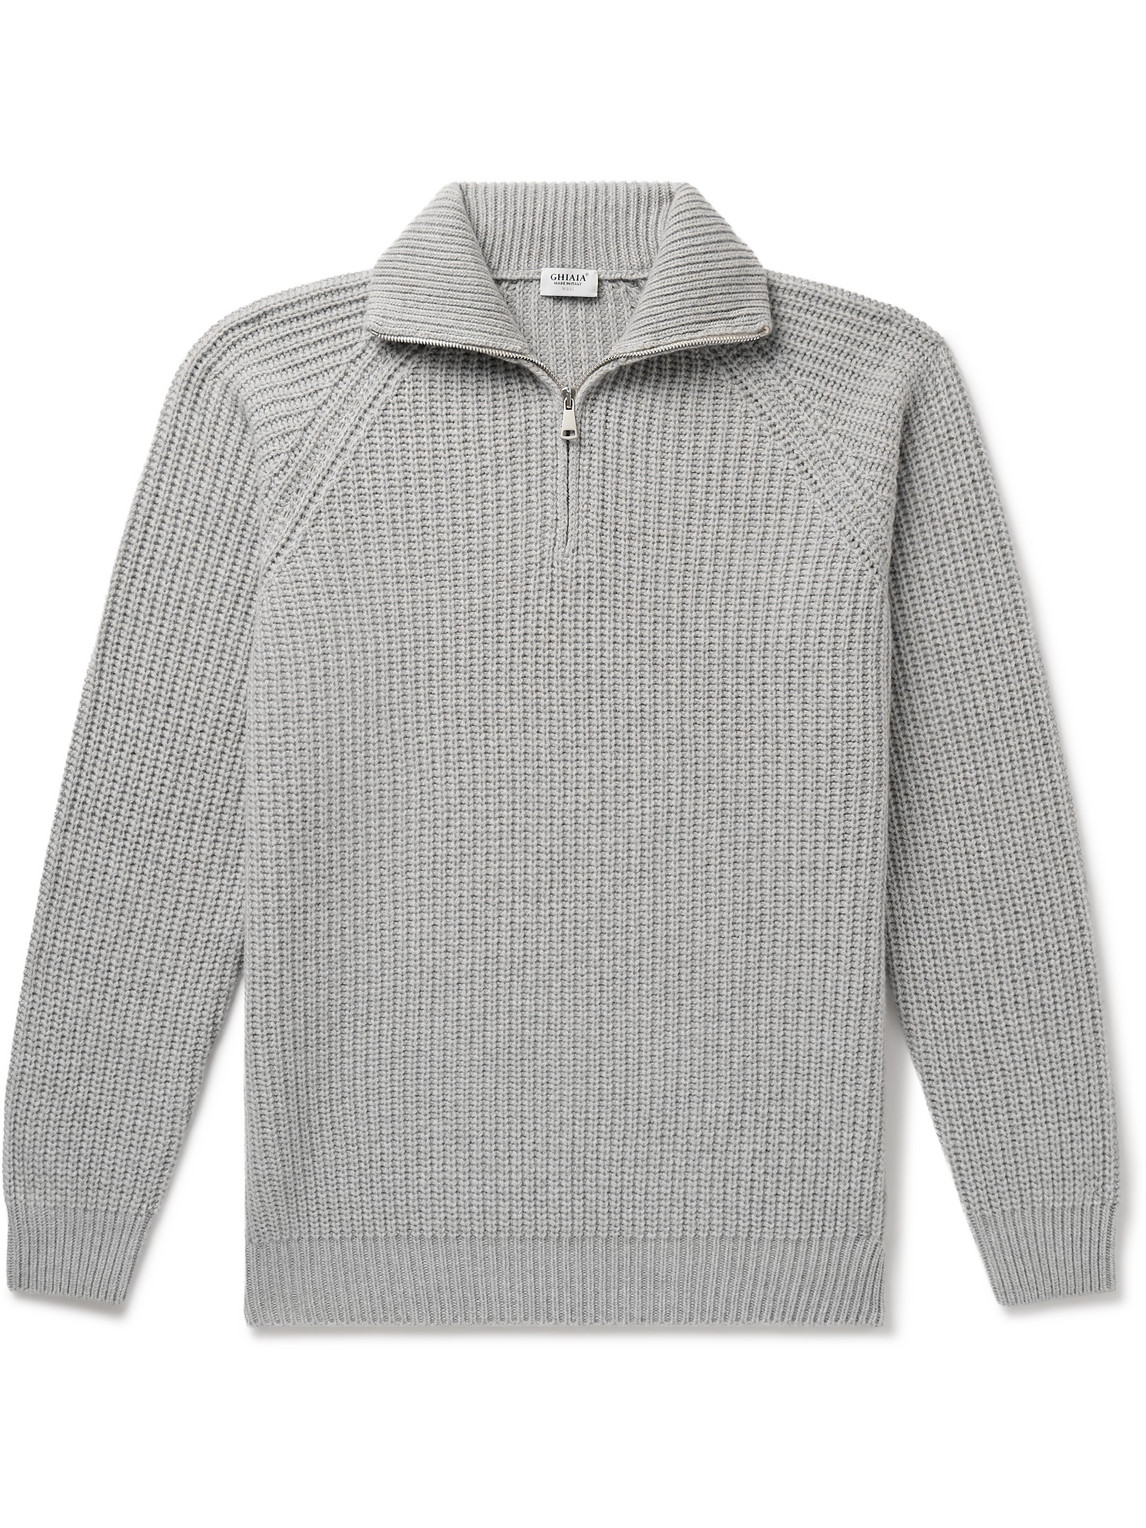 Ghiaia Cashmere Ribbed Wool Half-zip Sweater In Gray